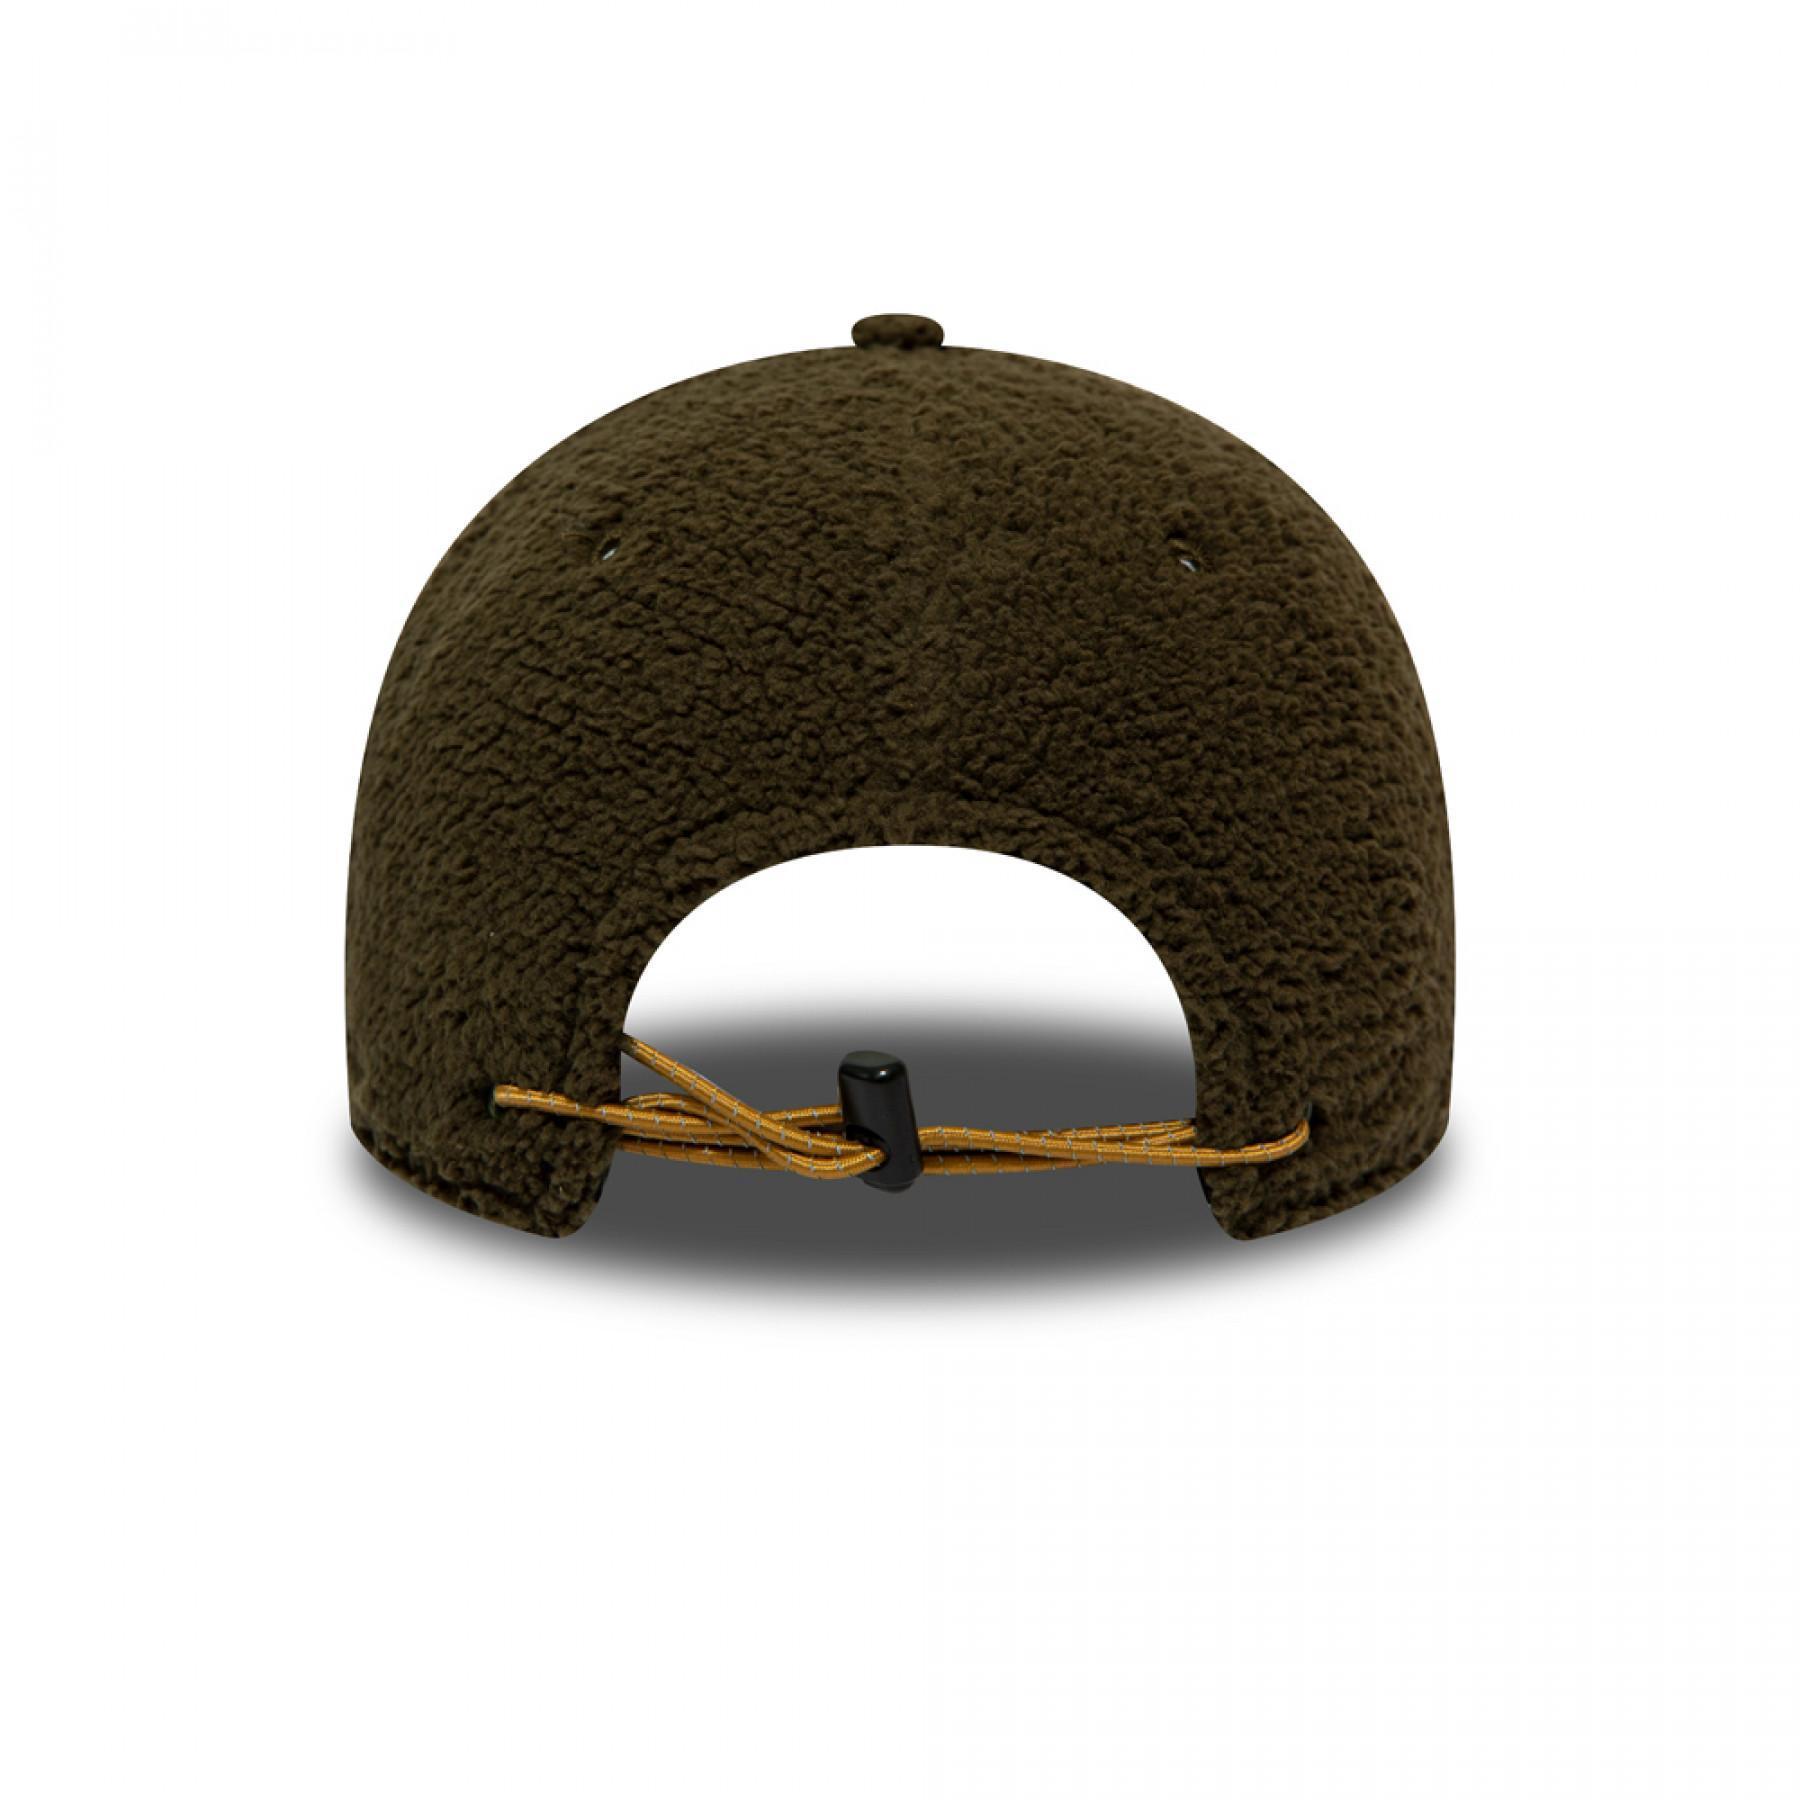 Casquette New Era 9Forty Utility